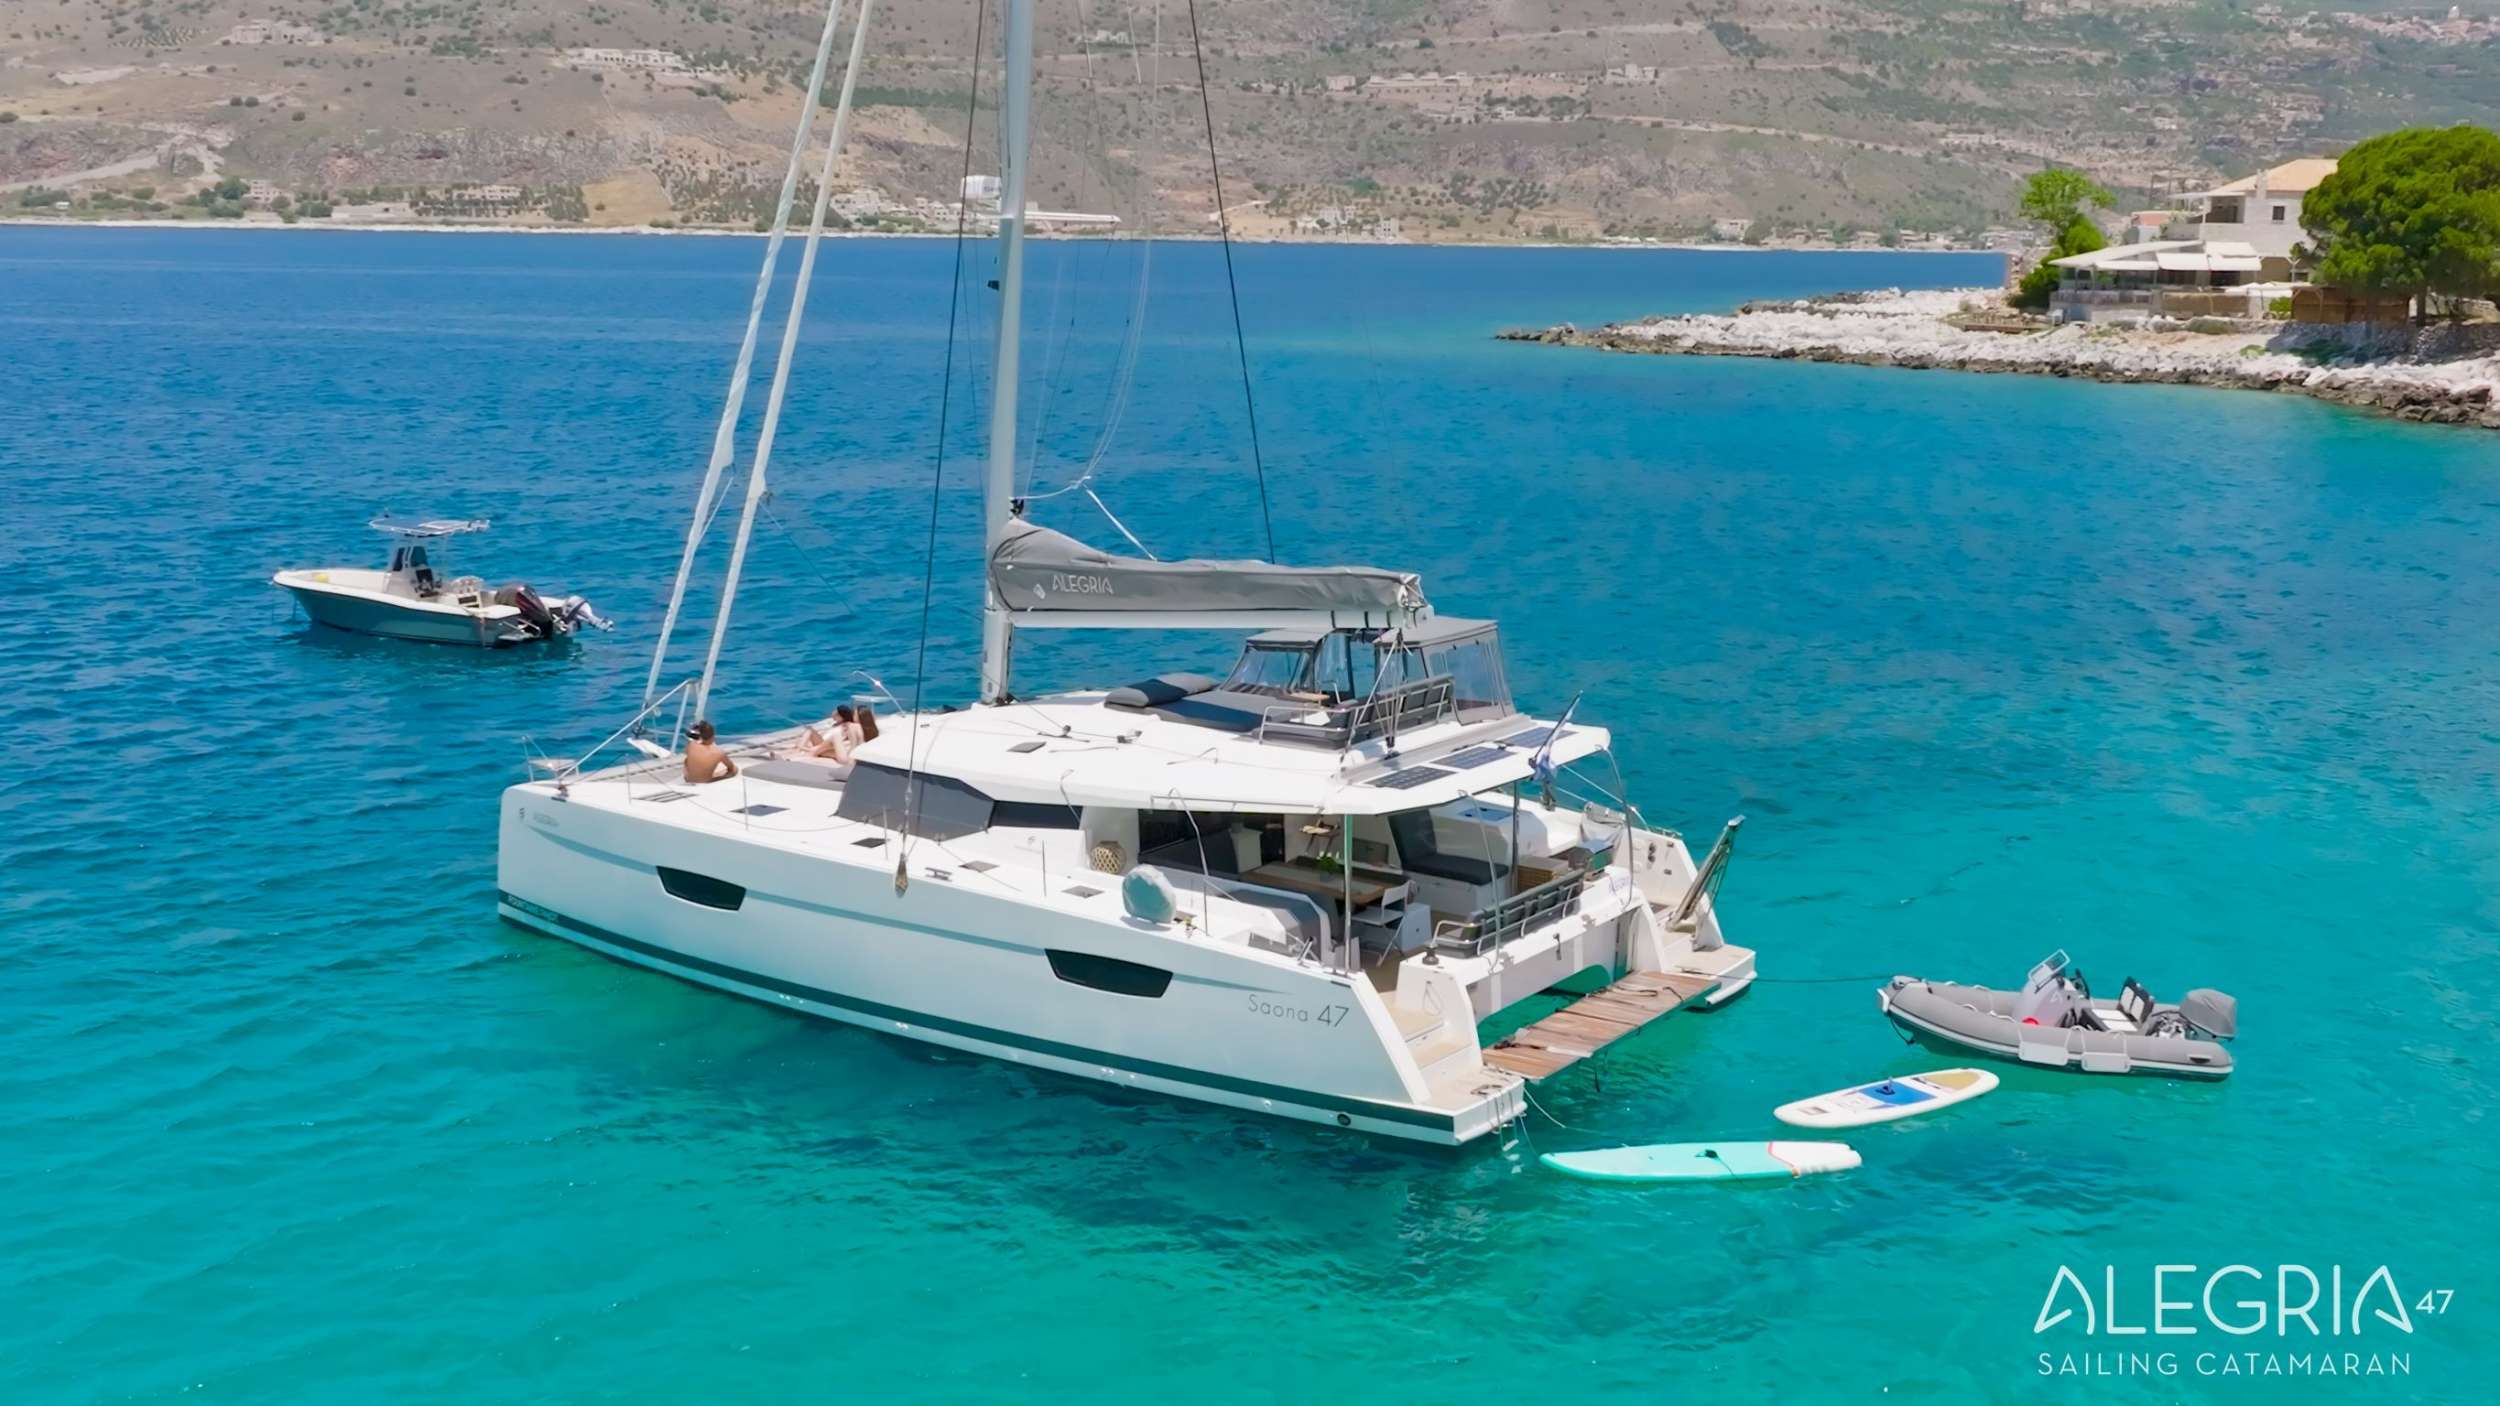 ALEGRIA - Yacht Charter Thasos & Boat hire in Greece 2